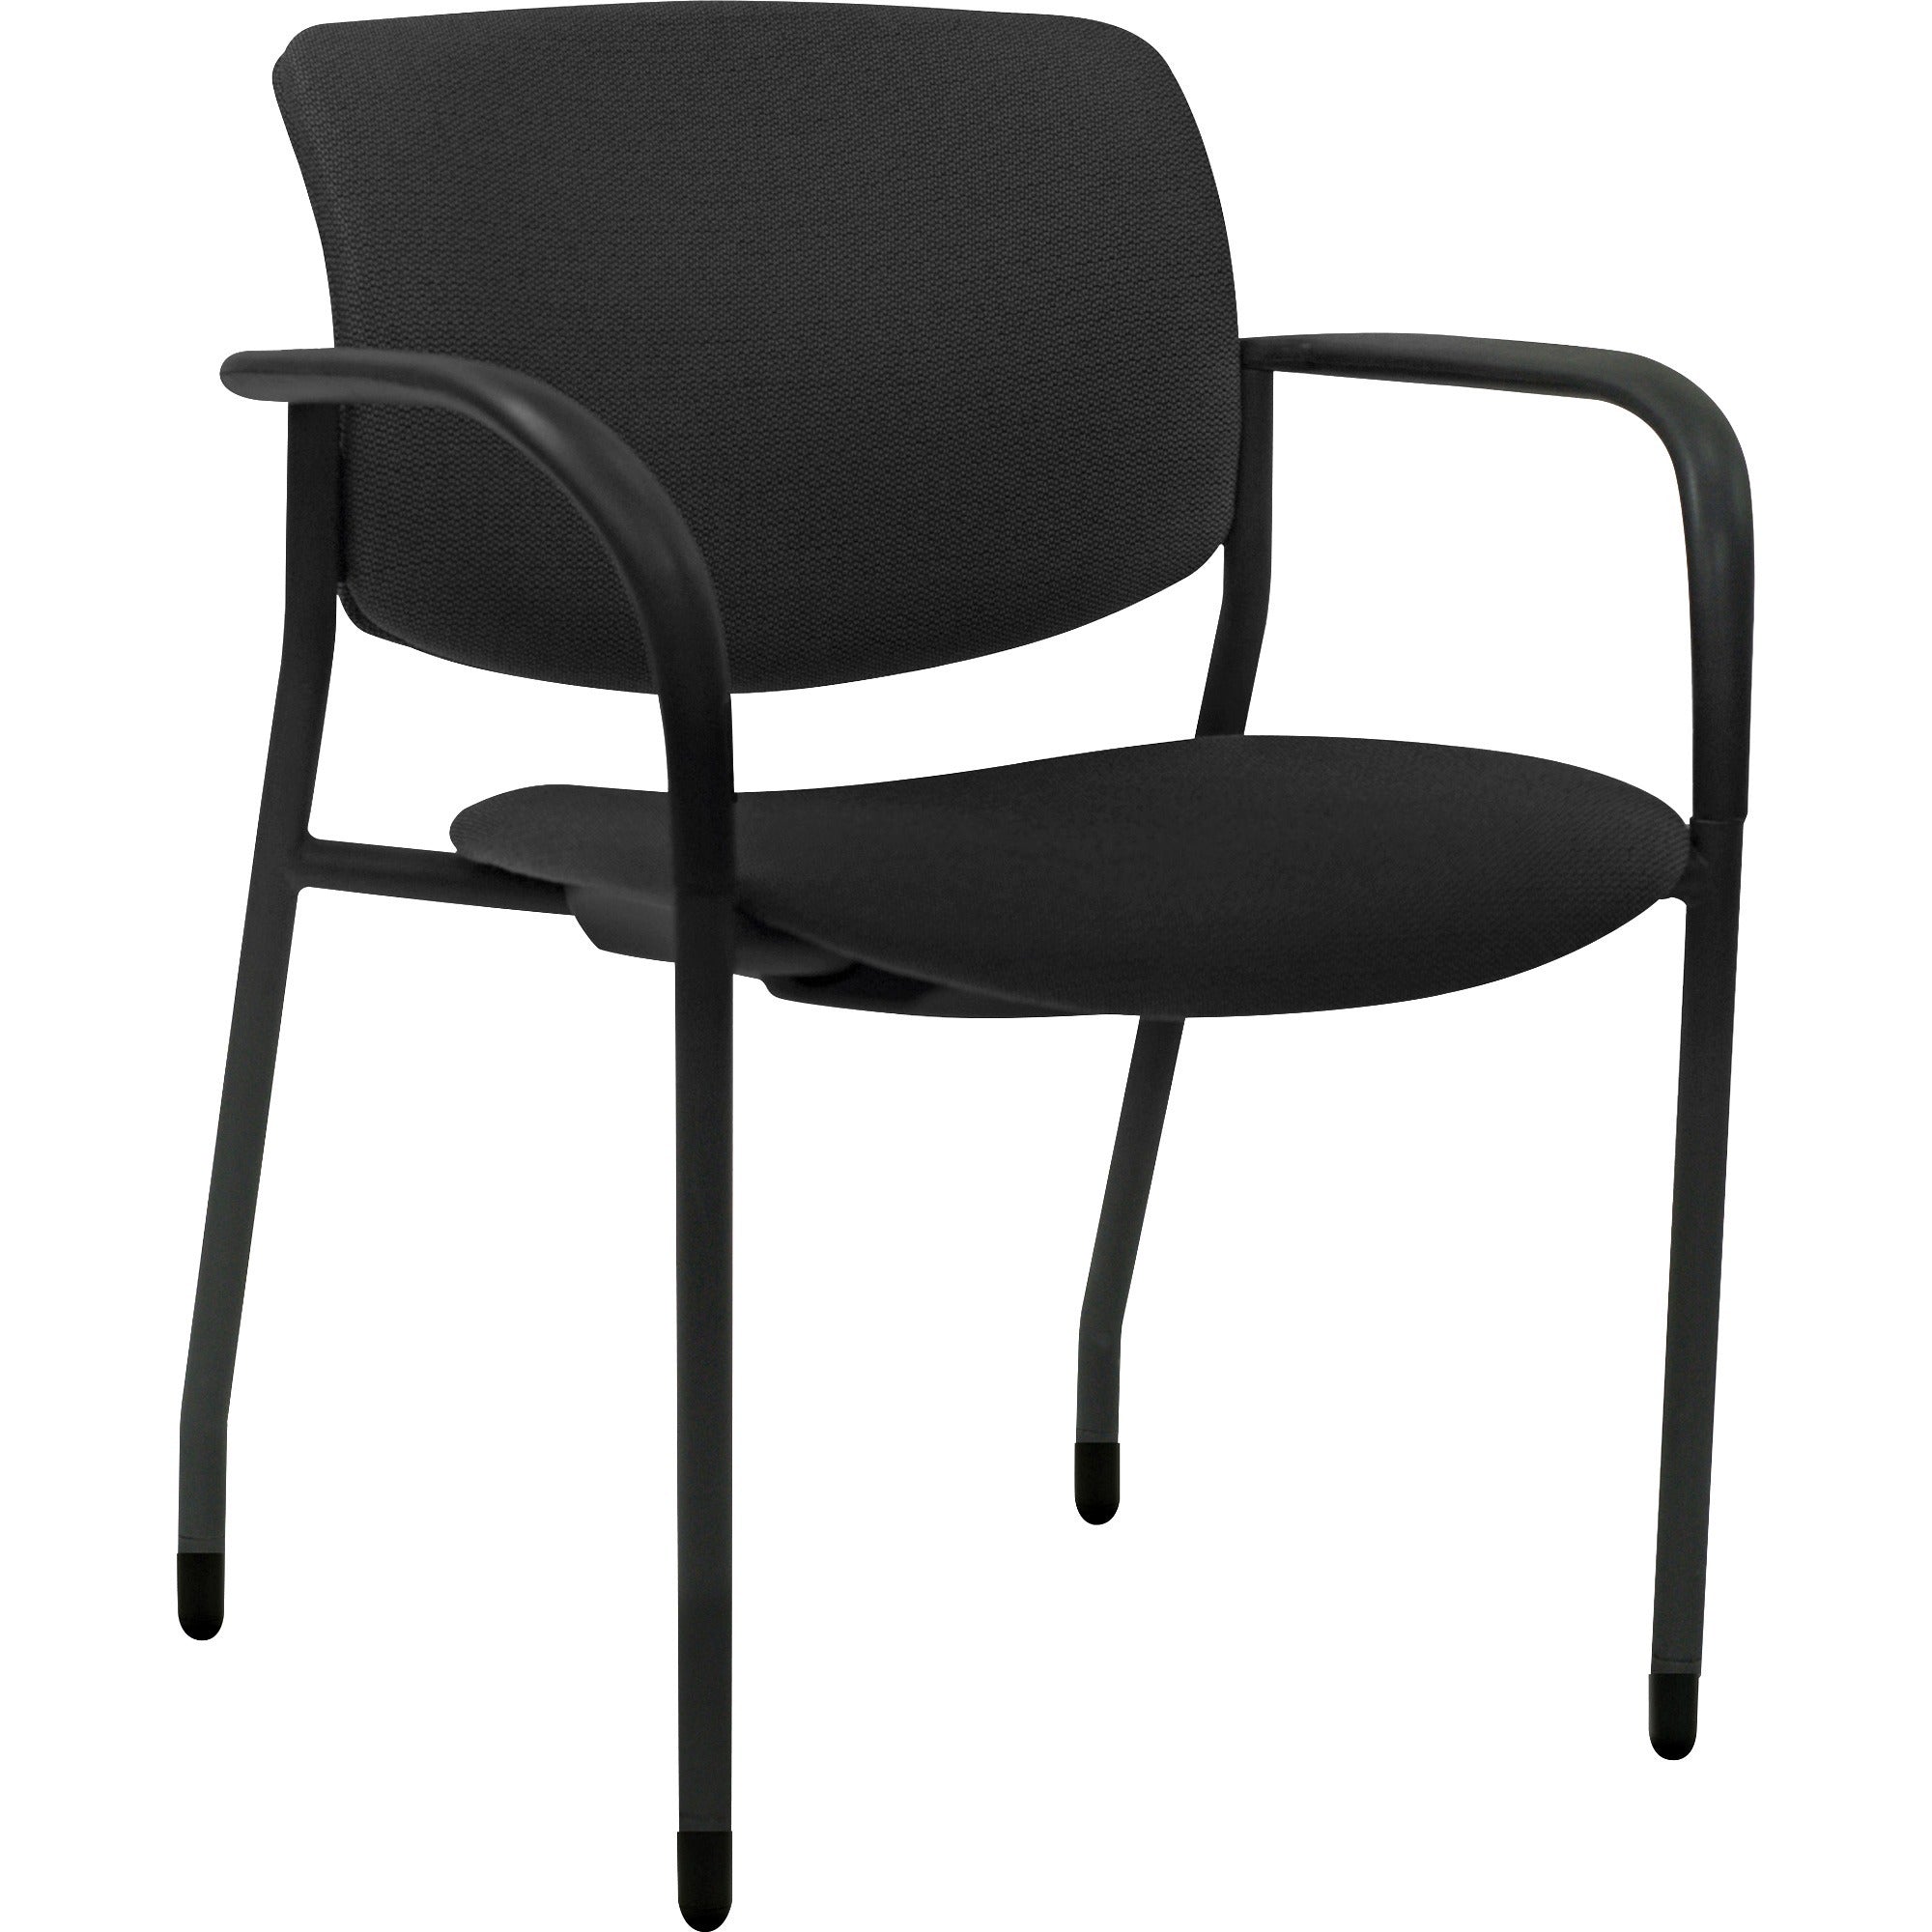 lorell-advent-upholstered-stack-chairs-with-arms-black-foam-fabric-seat-black-foam-fabric-back-powder-coated-black-tubular-steel-frame-four-legged-base-armrest-2-carton_llr83114a205 - 1